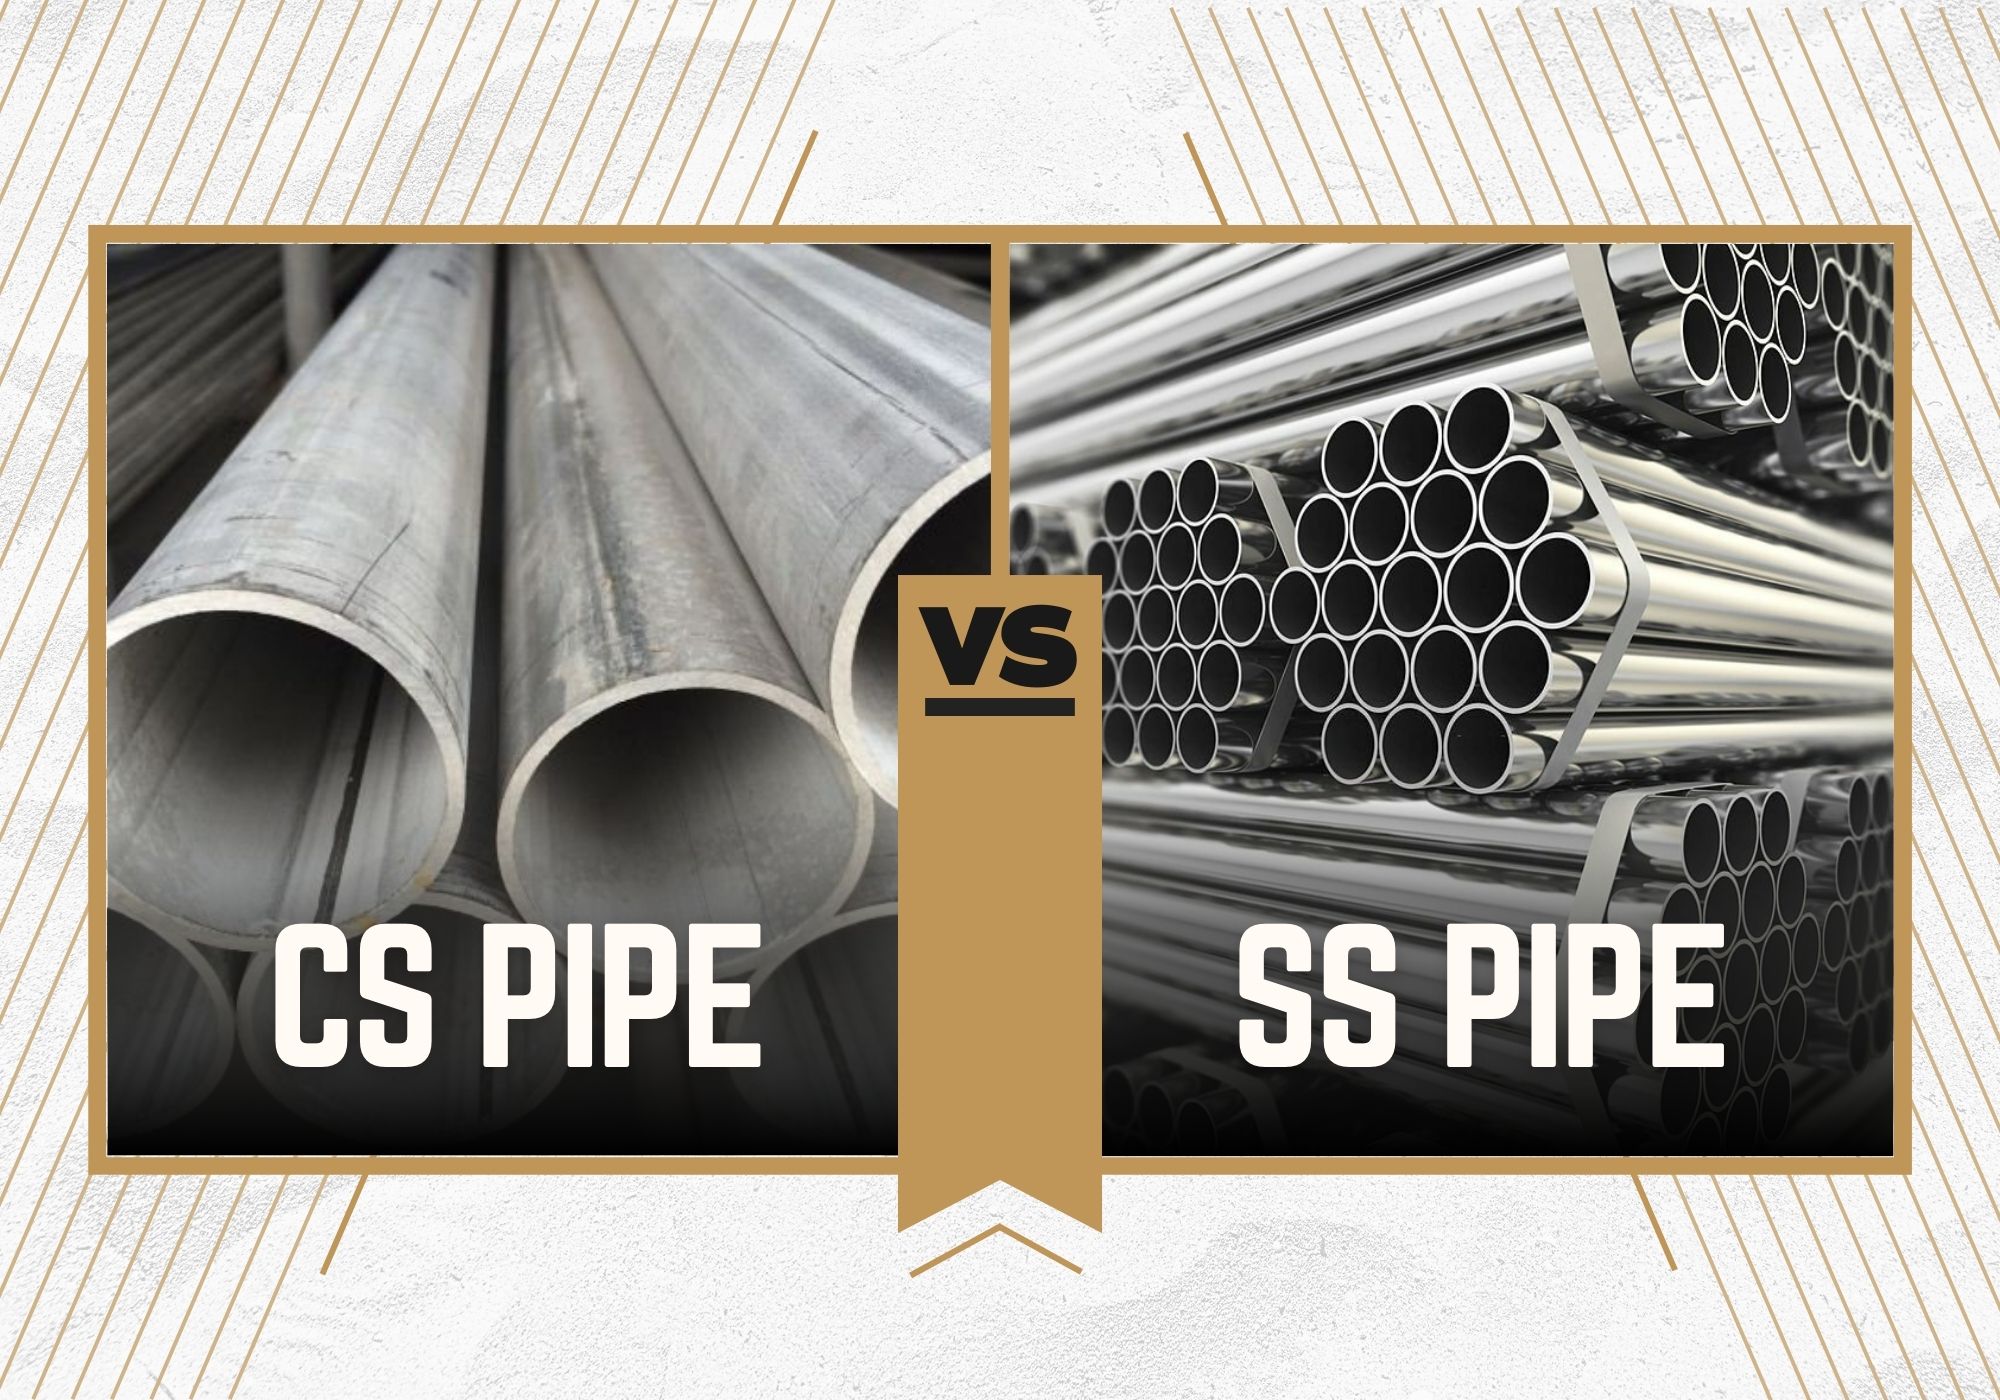 Carbon steel vs stainless steel pipe: What’s the difference